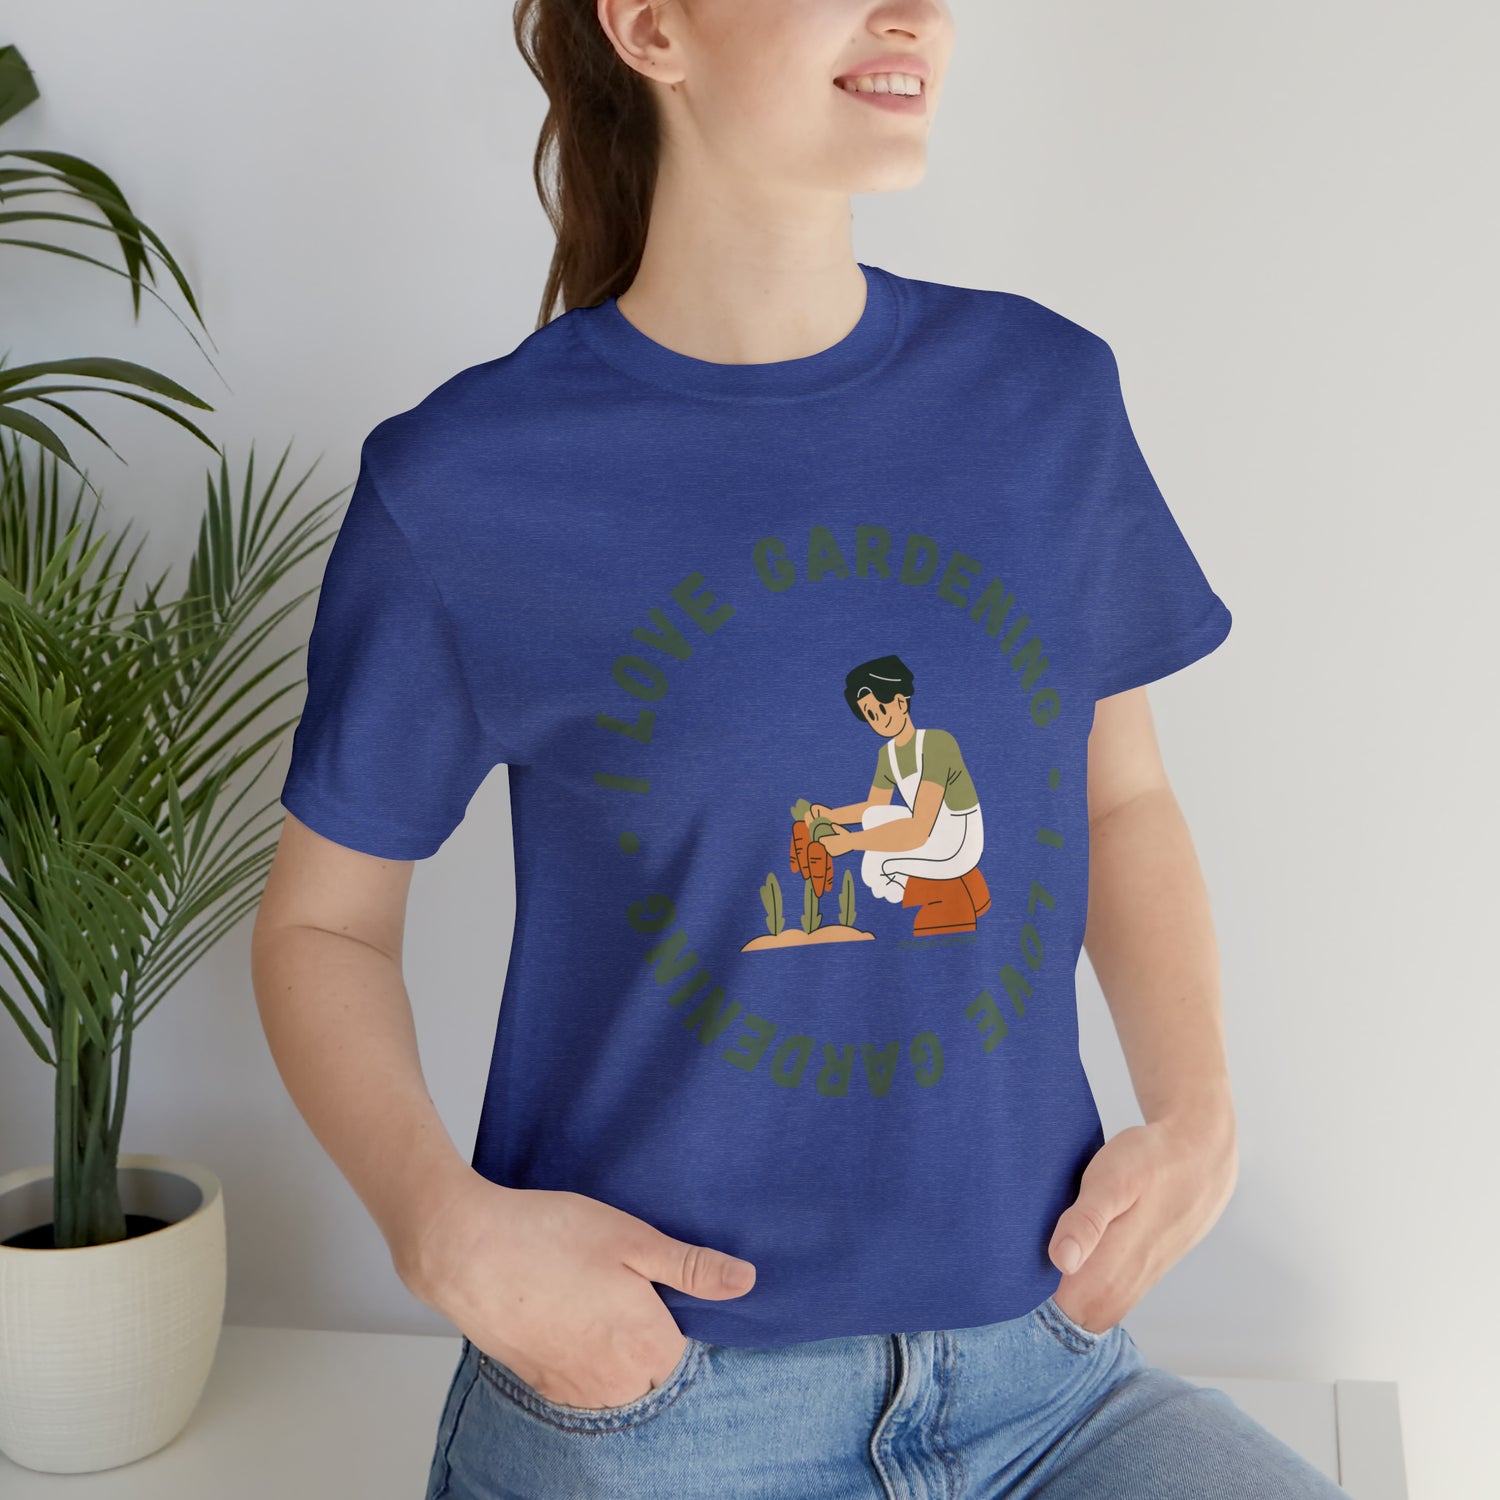 Heather True Royal T-Shirt Tshirt Design Gift for Friend and Family Short Sleeved Shirt Petrova Designs